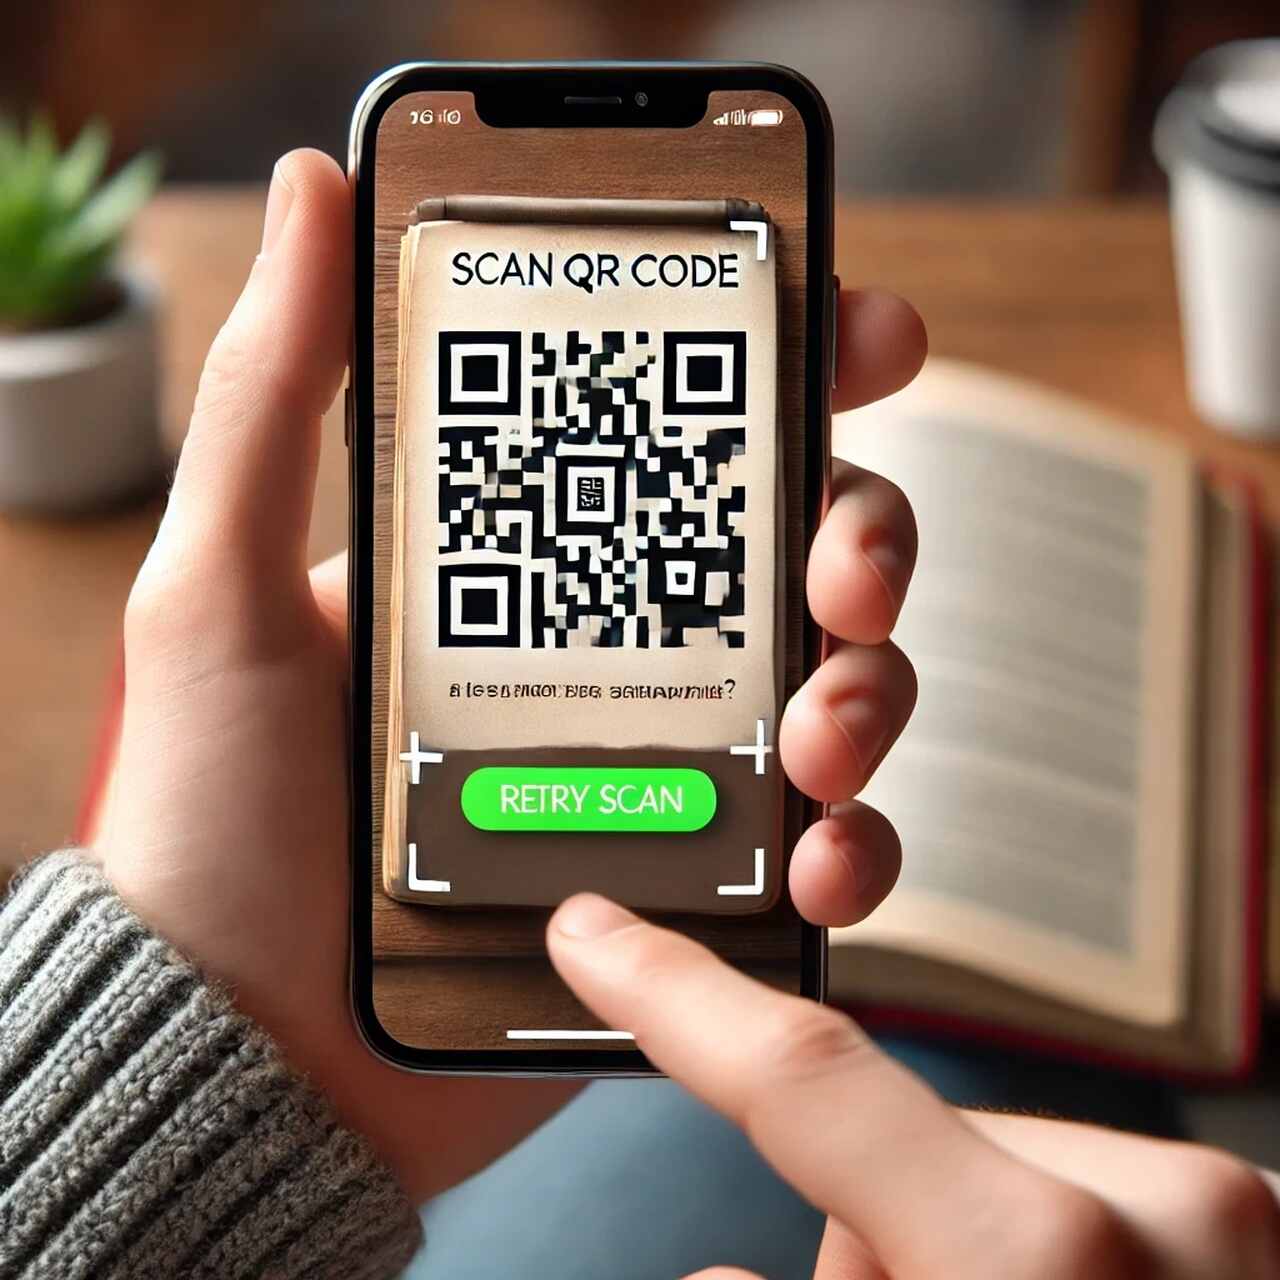 retry scan button for qr code not working